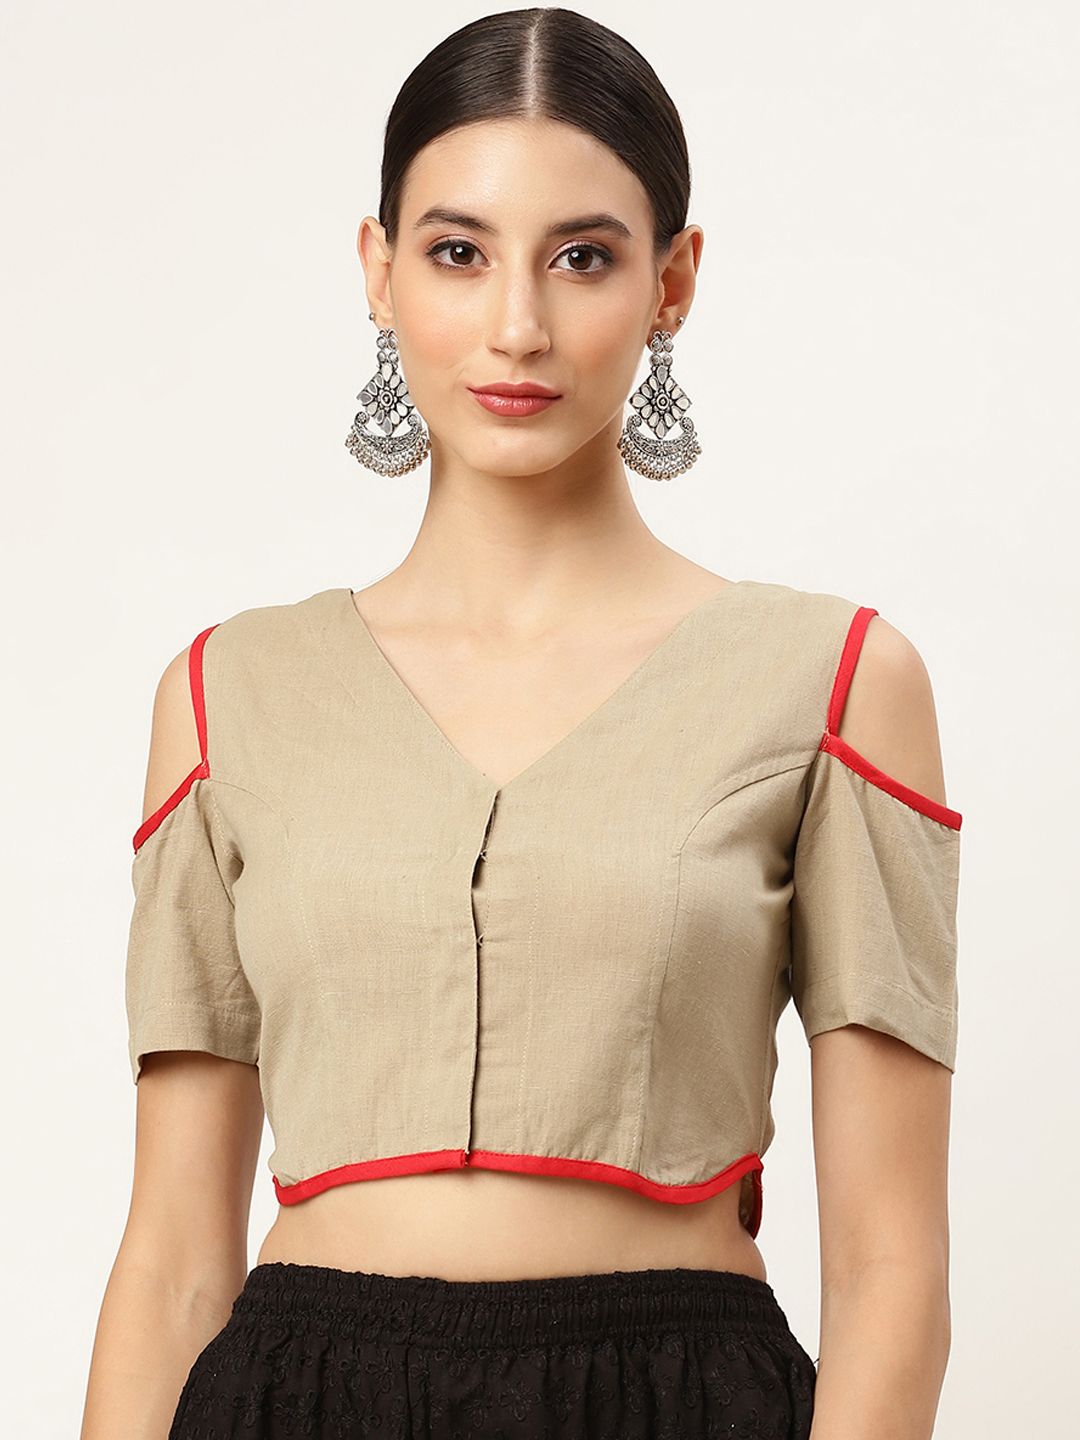 Molcha Women Beige Solid Cotton Saree Blouse with Cold-Shoulder Sleeves Price in India